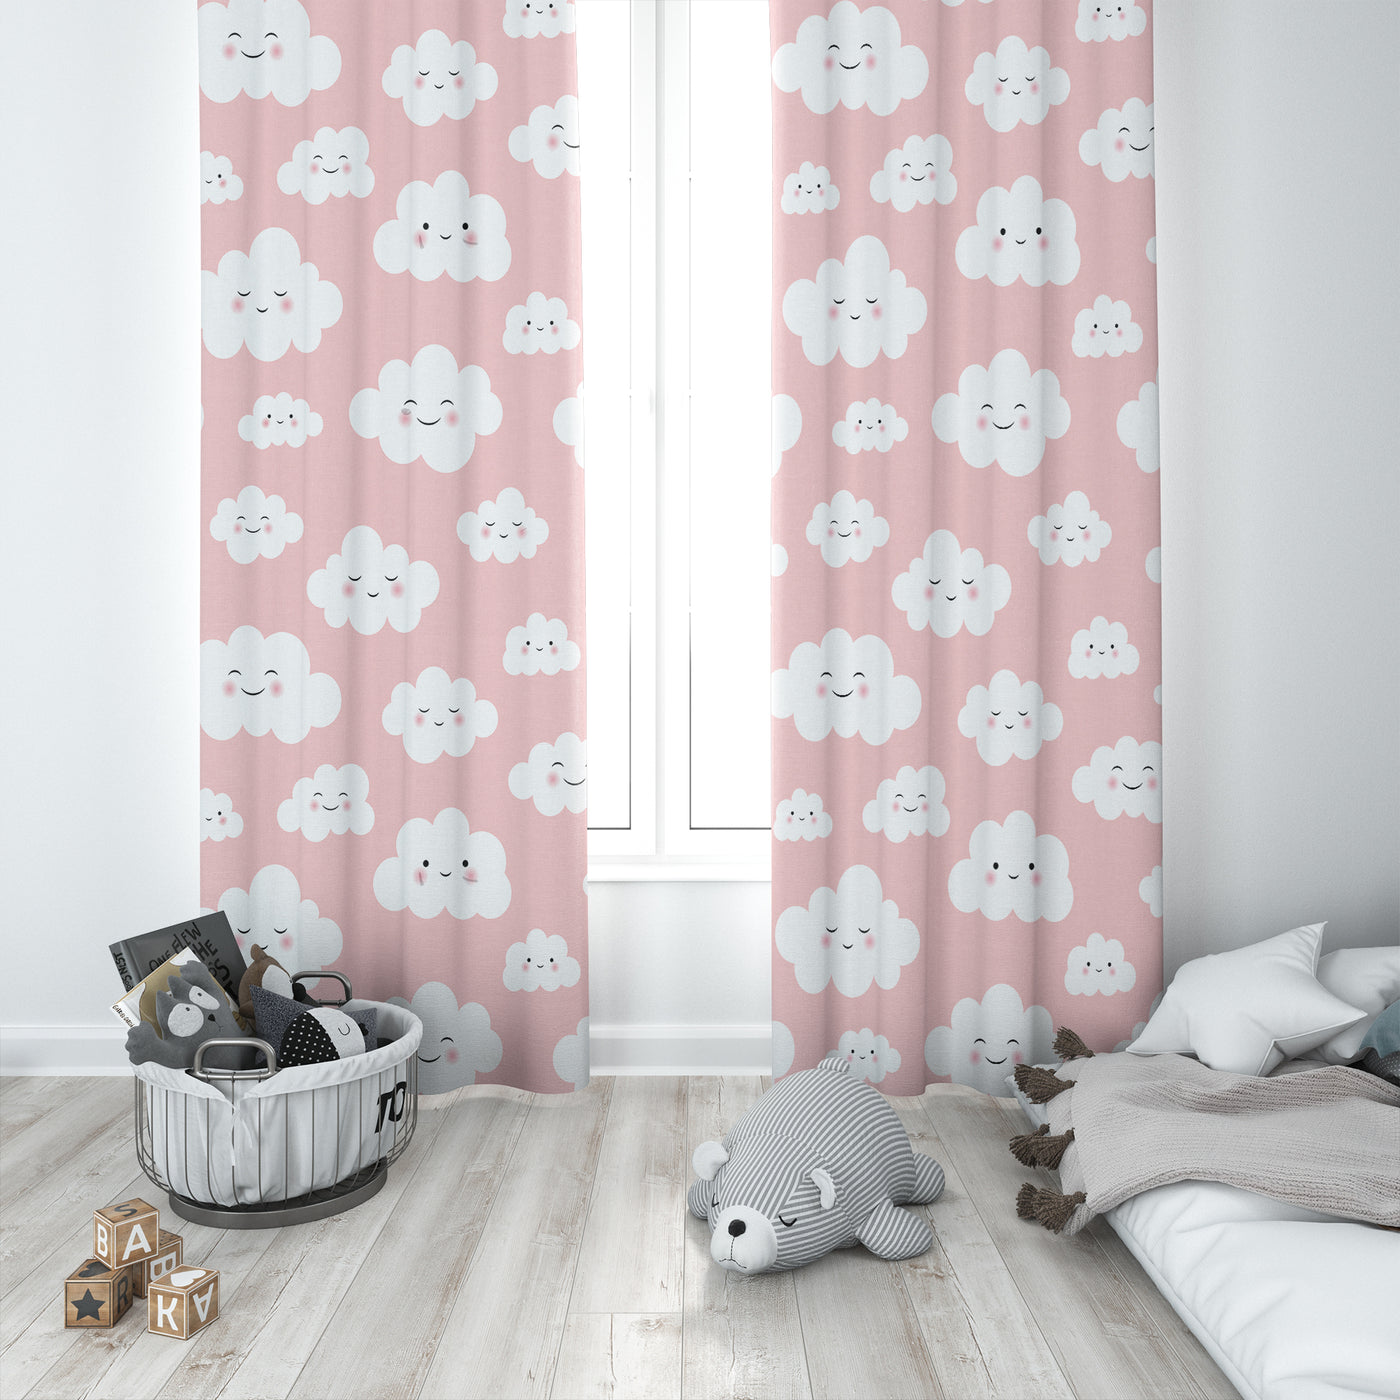 Smile clouds kids Curtain